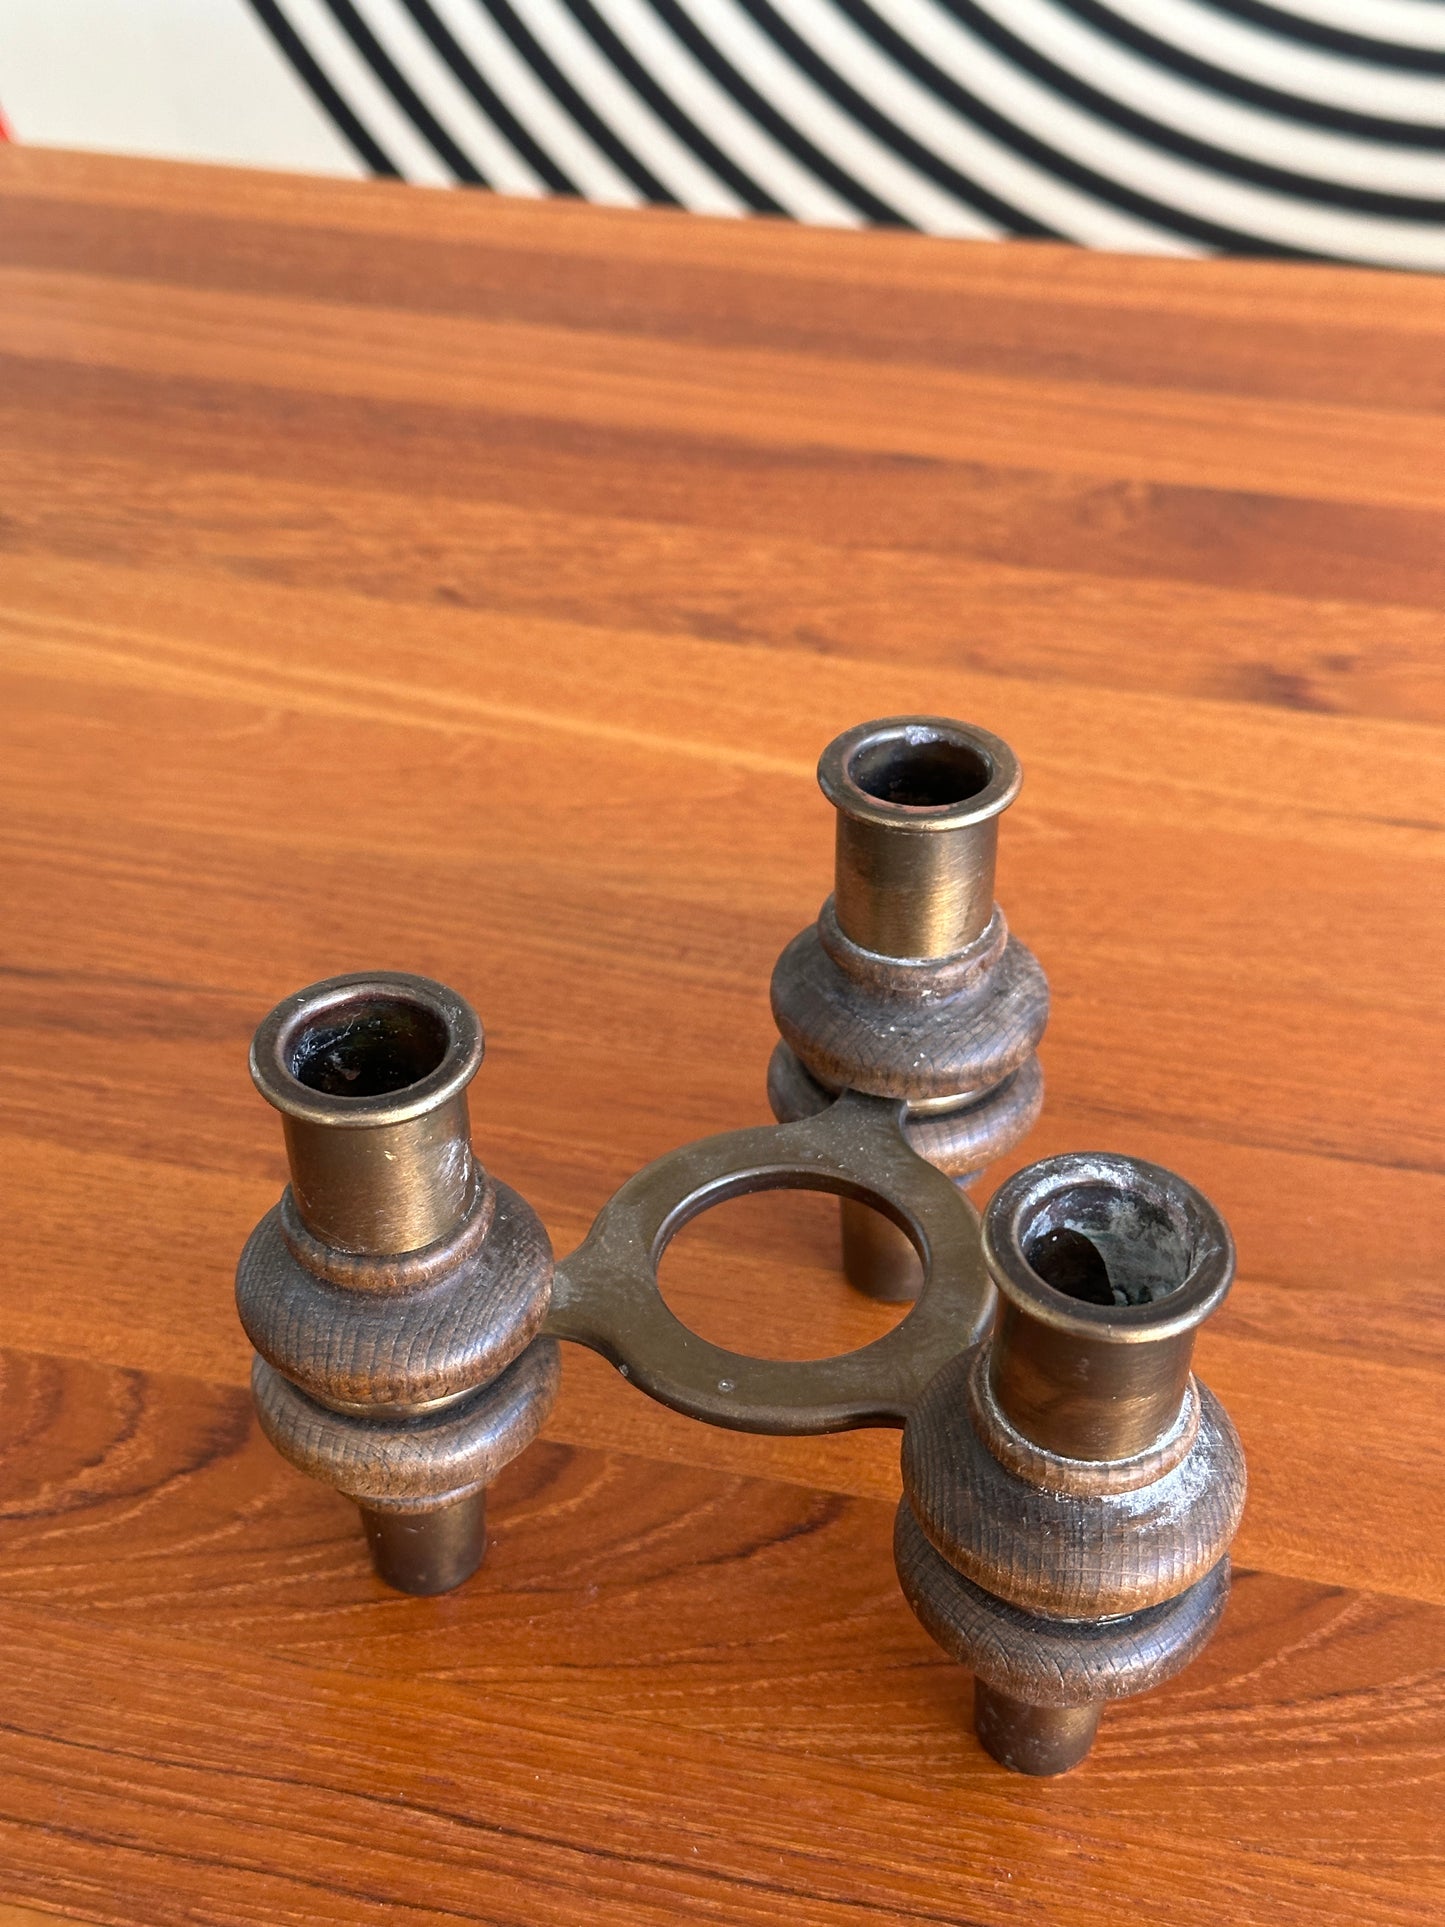 Vintage Wood and Brass Candle Holder